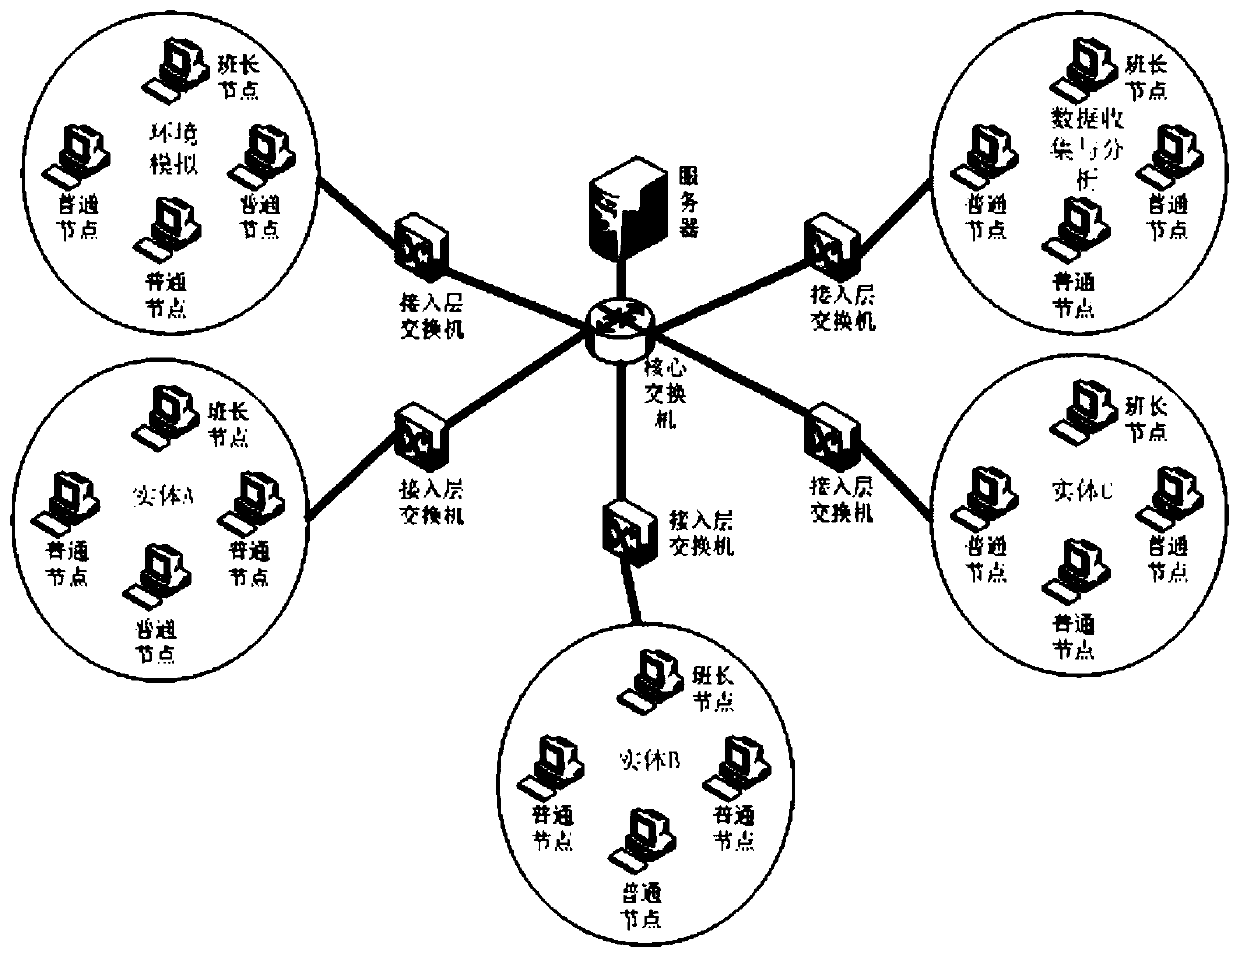 Distributed system simulation communication system based on SMC network